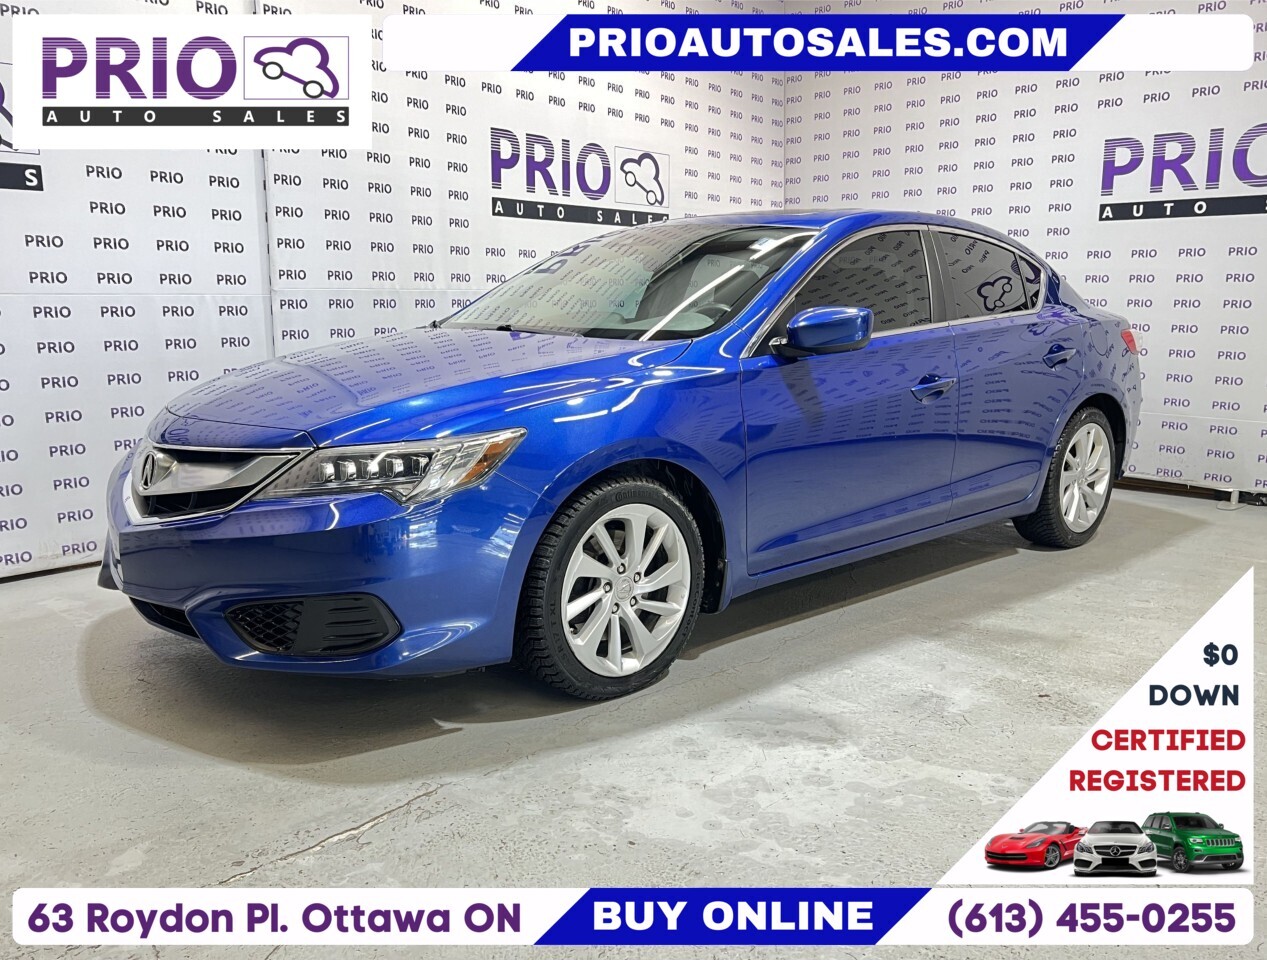 2017 Acura ILX Automatic with Technology Package